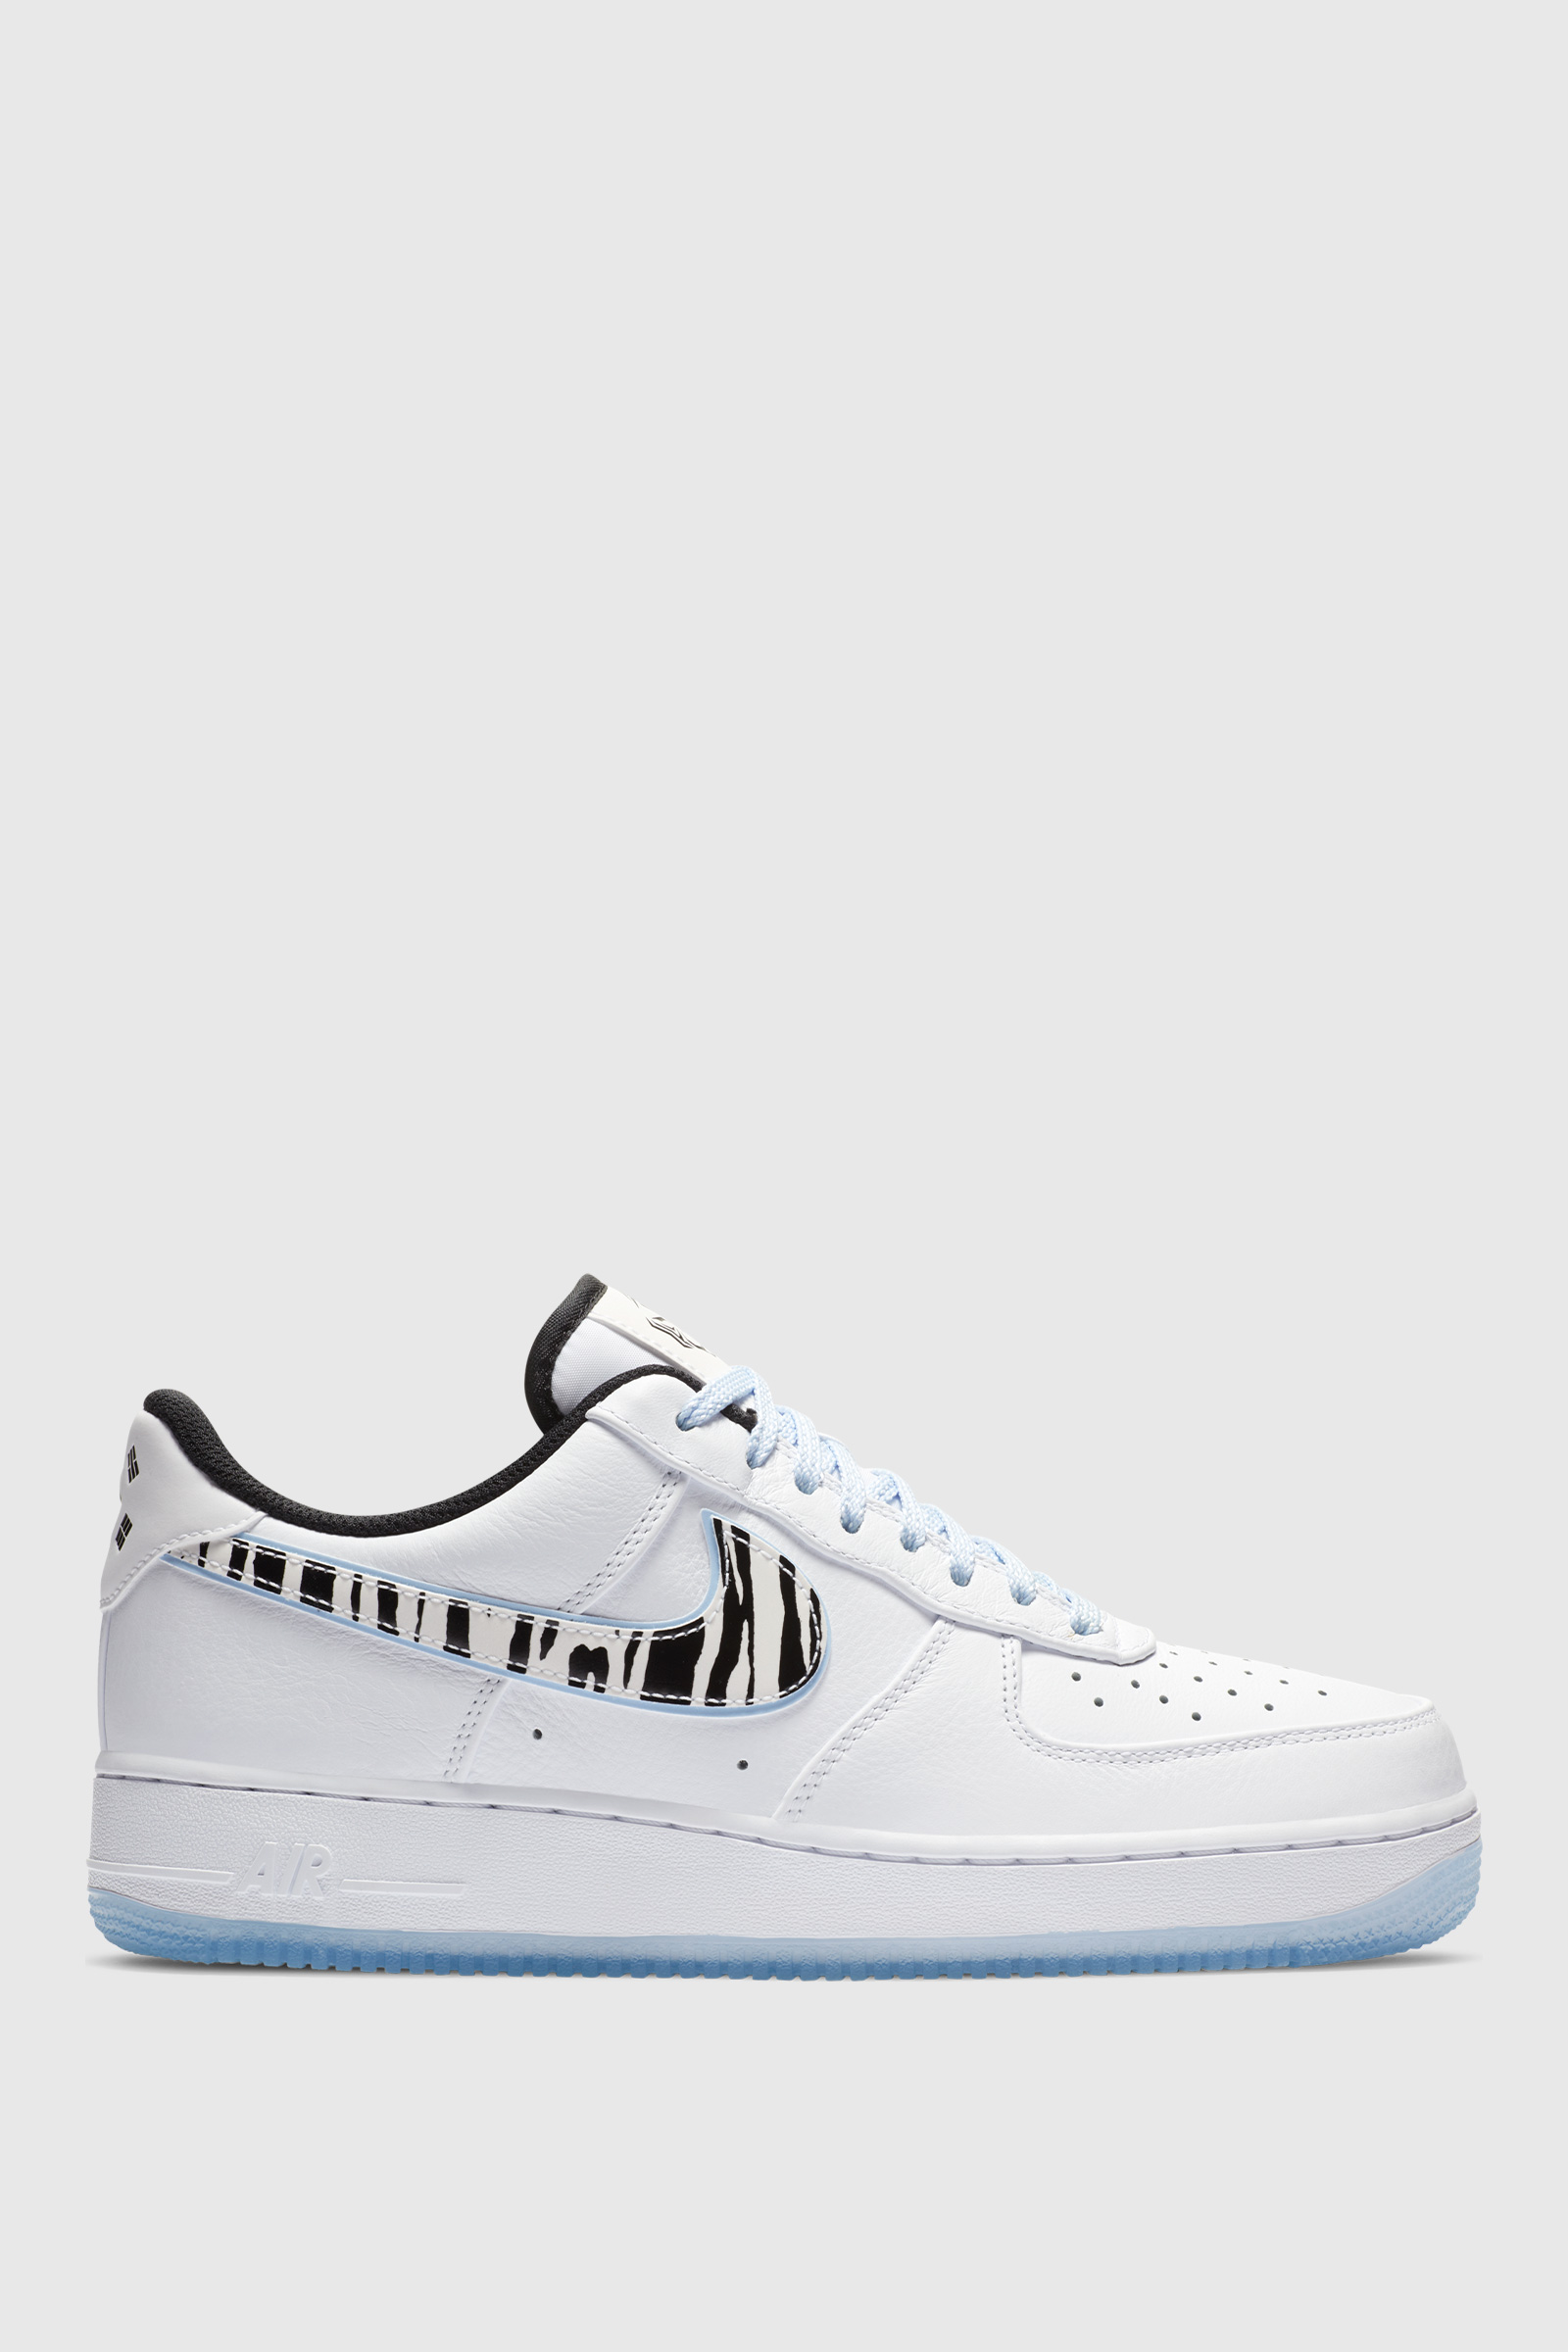 nike airforces 1